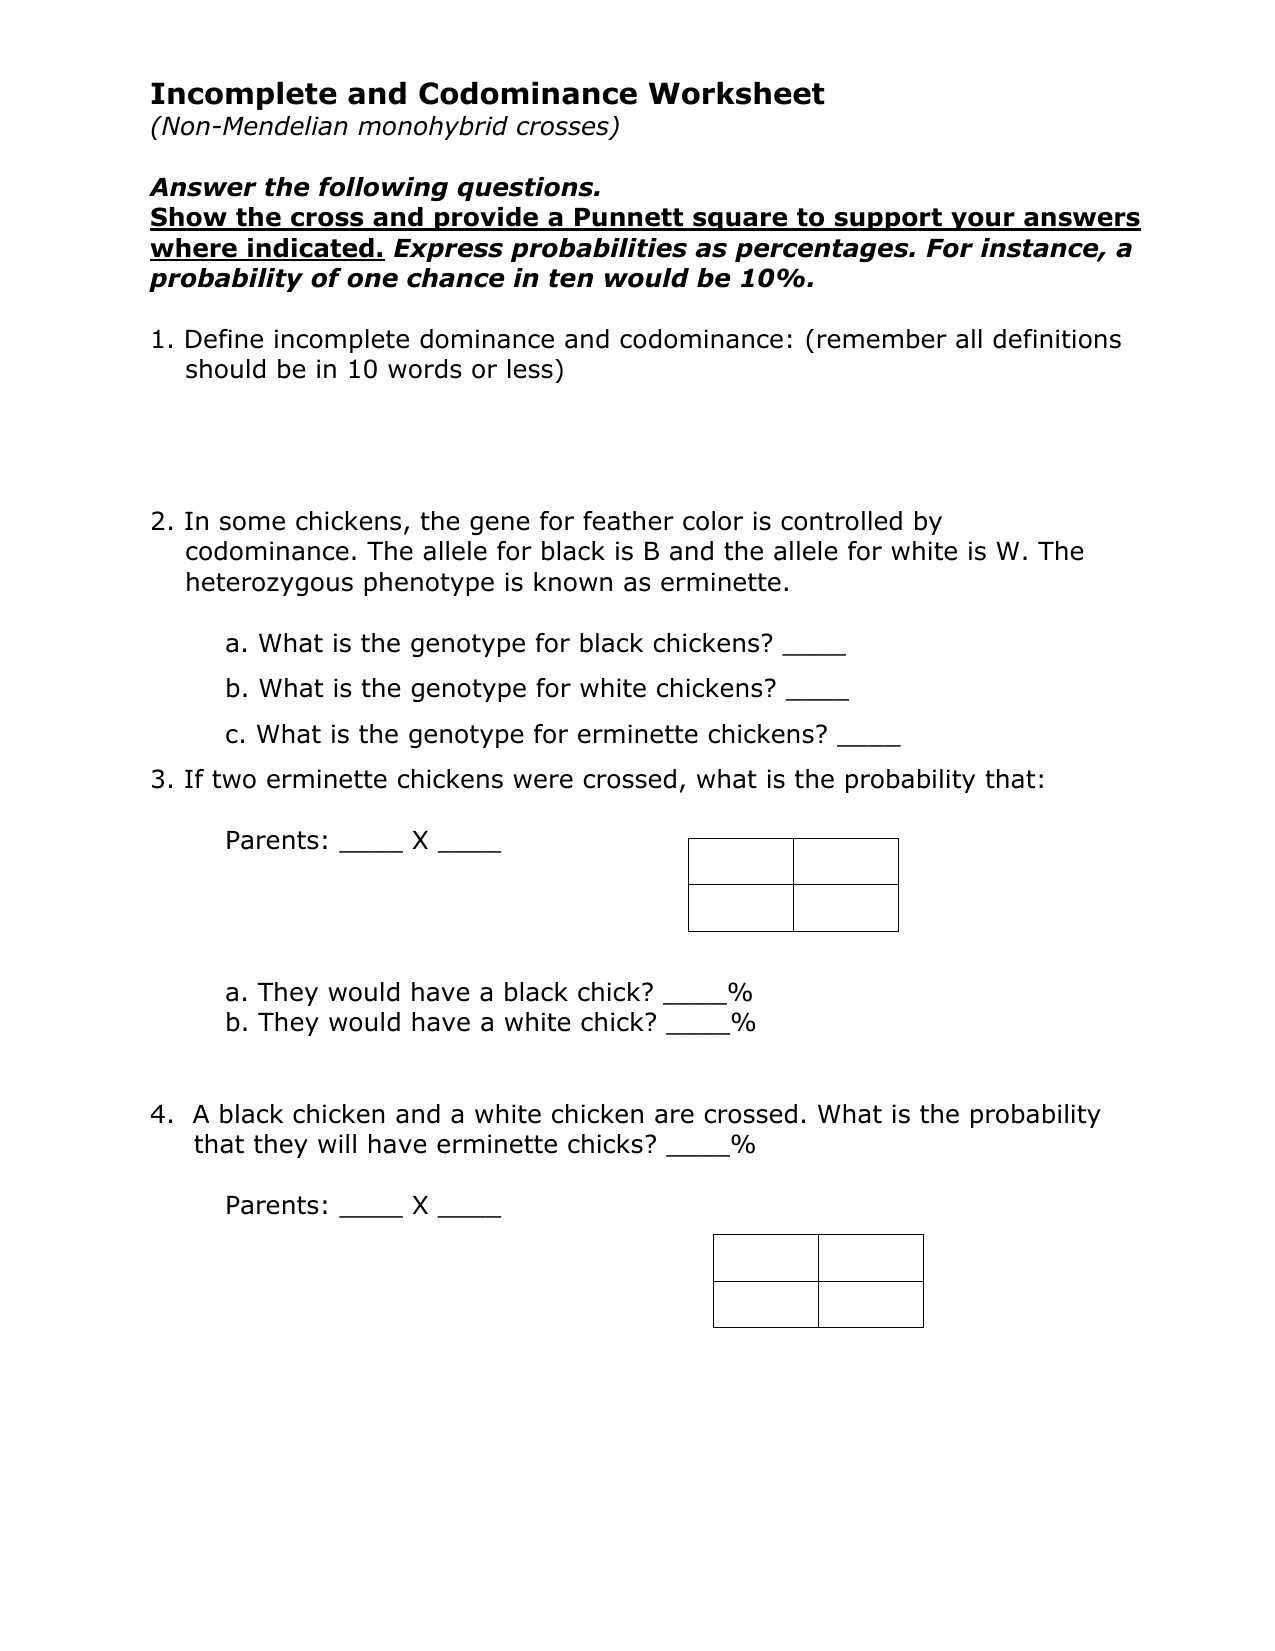 Codominance Incomplete Dominance Worksheet Answers Also Codominance In Plete Dominance Worksheet Answers Inspirational In